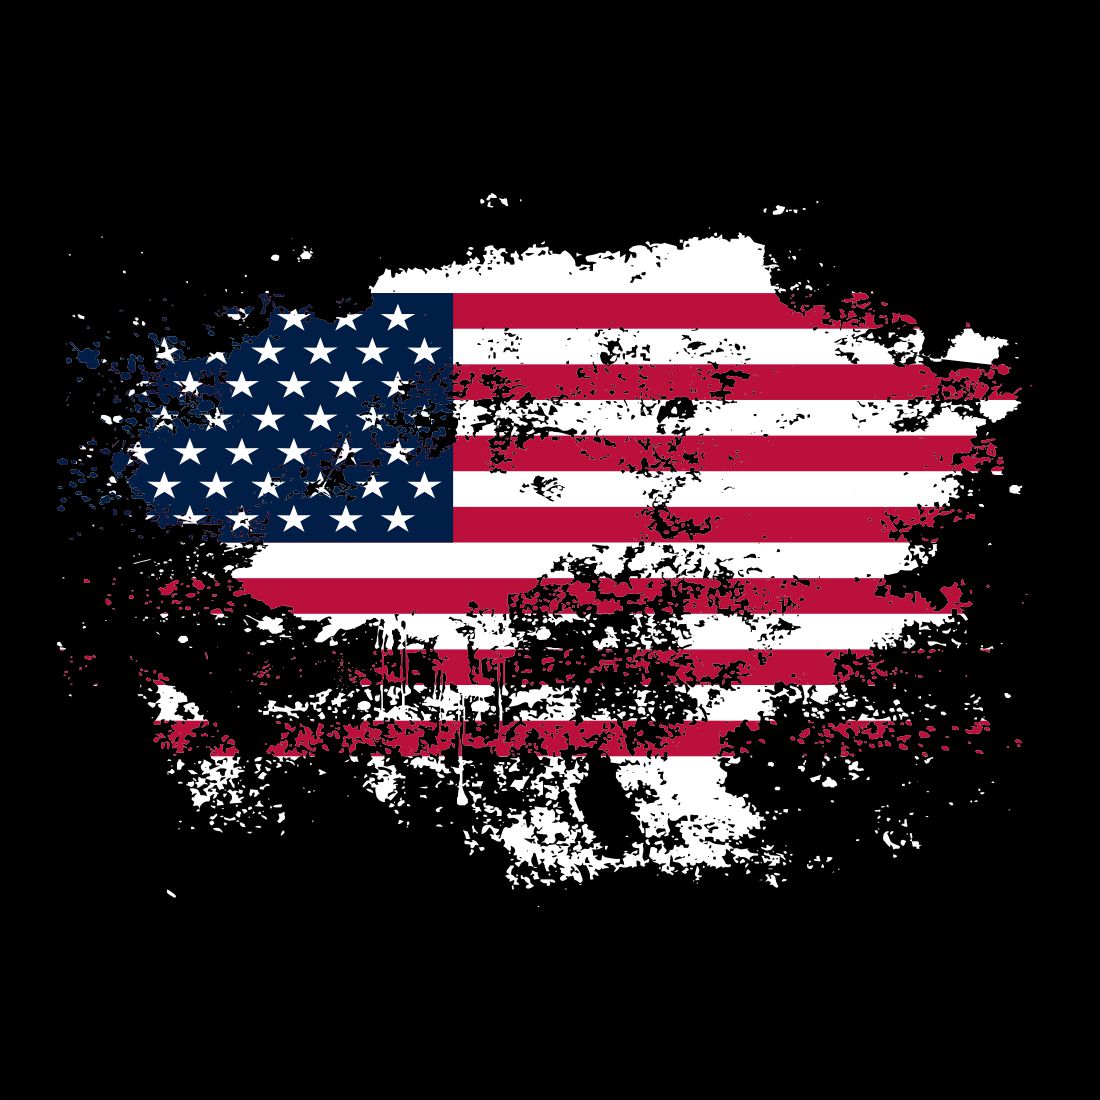 American flag painted on a black background.